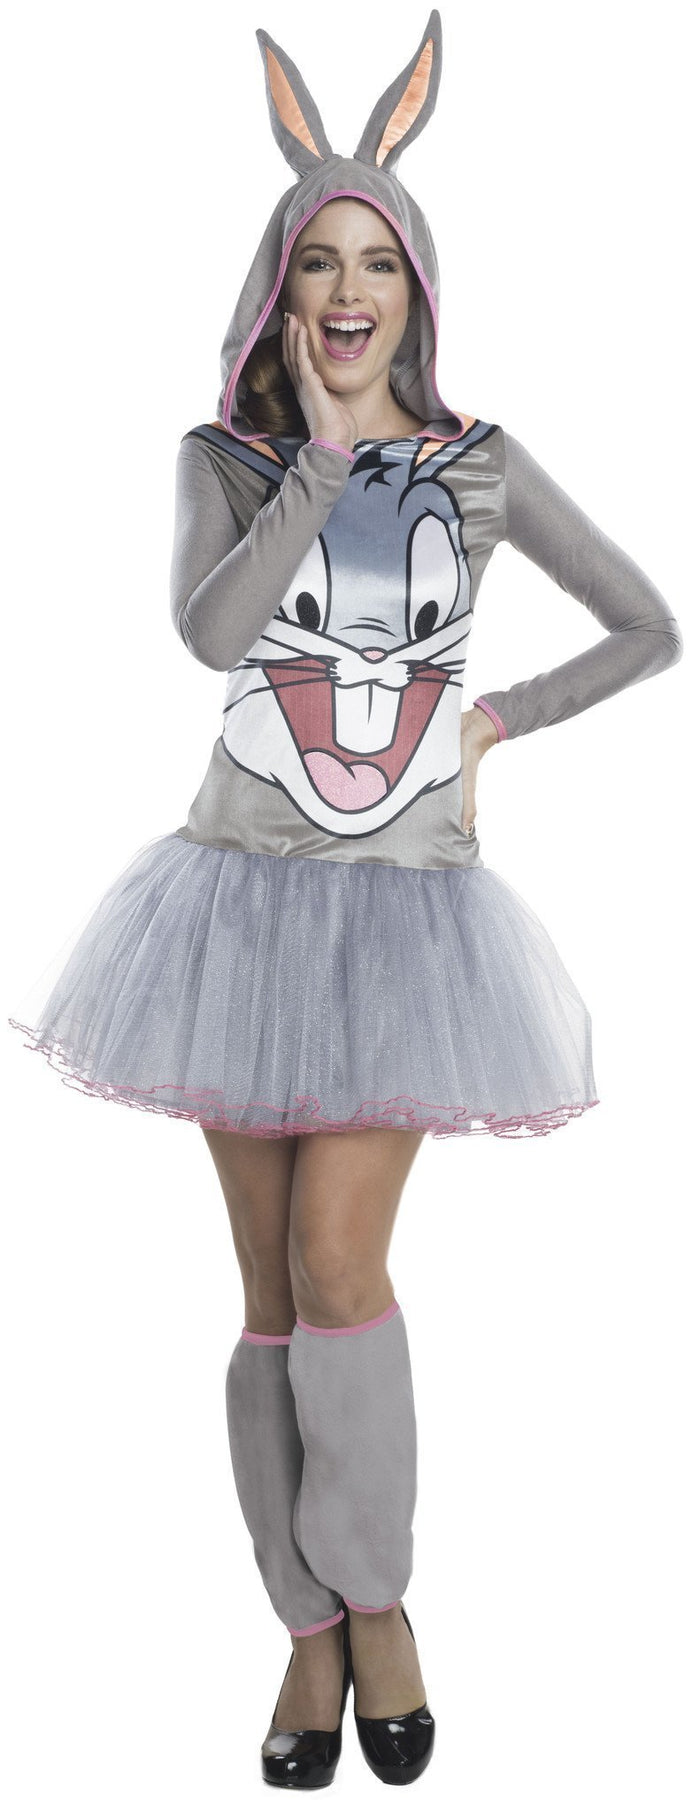 Bugs Bunny Hooded Tutu Costume for Adults - Warner Bros Looney Tunes